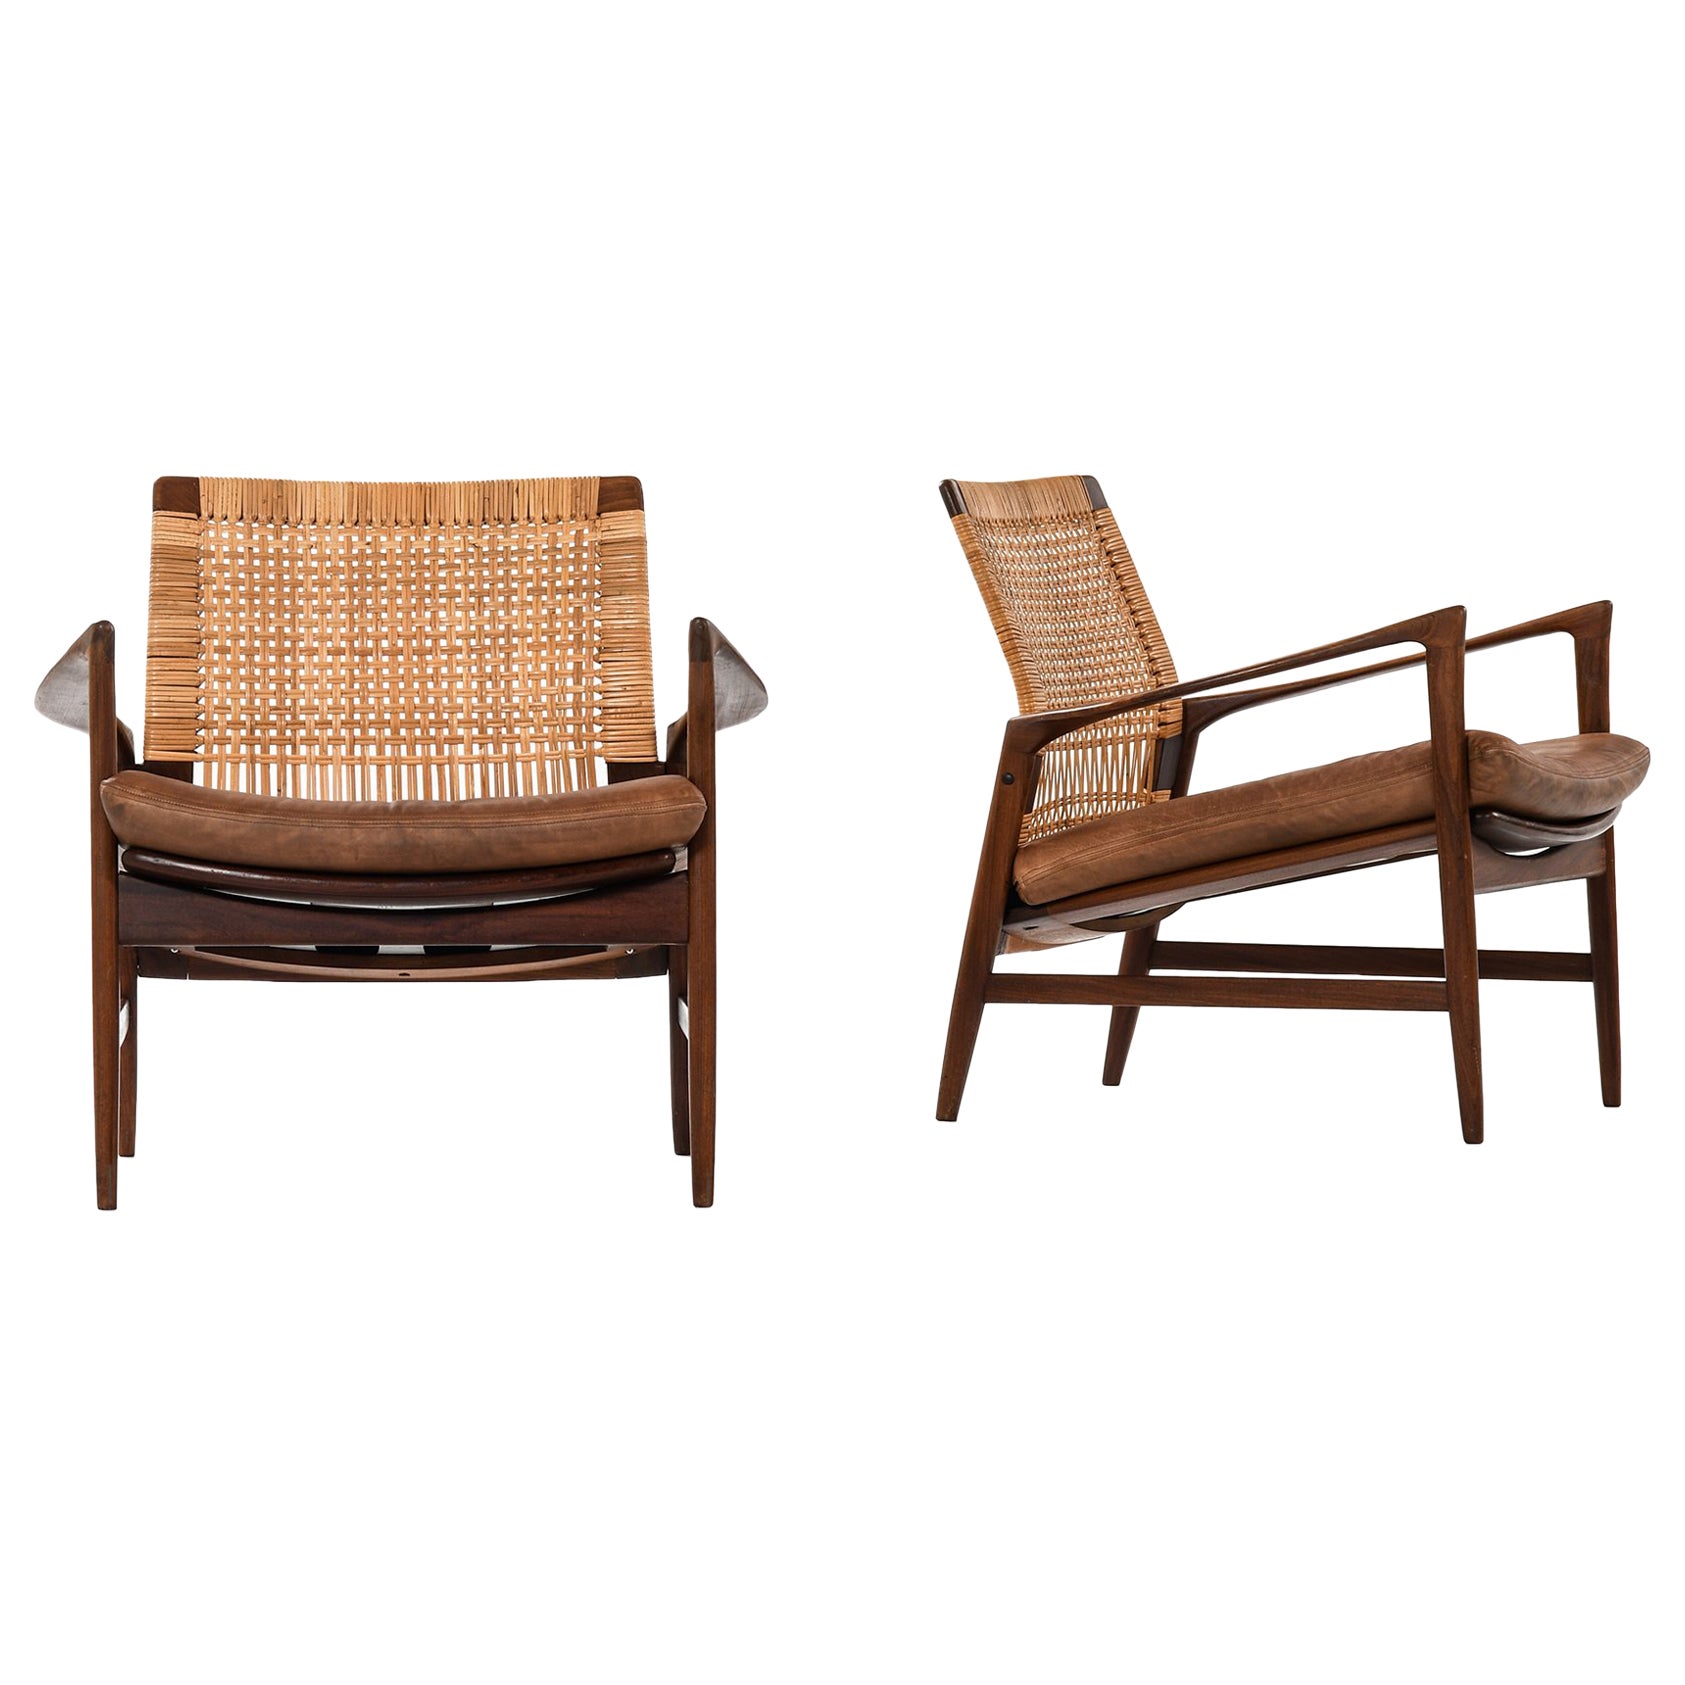 Pair of Easy Chairs in Teak, Cane with Brown Leather by Ib Kofod-Larsen, 1950s